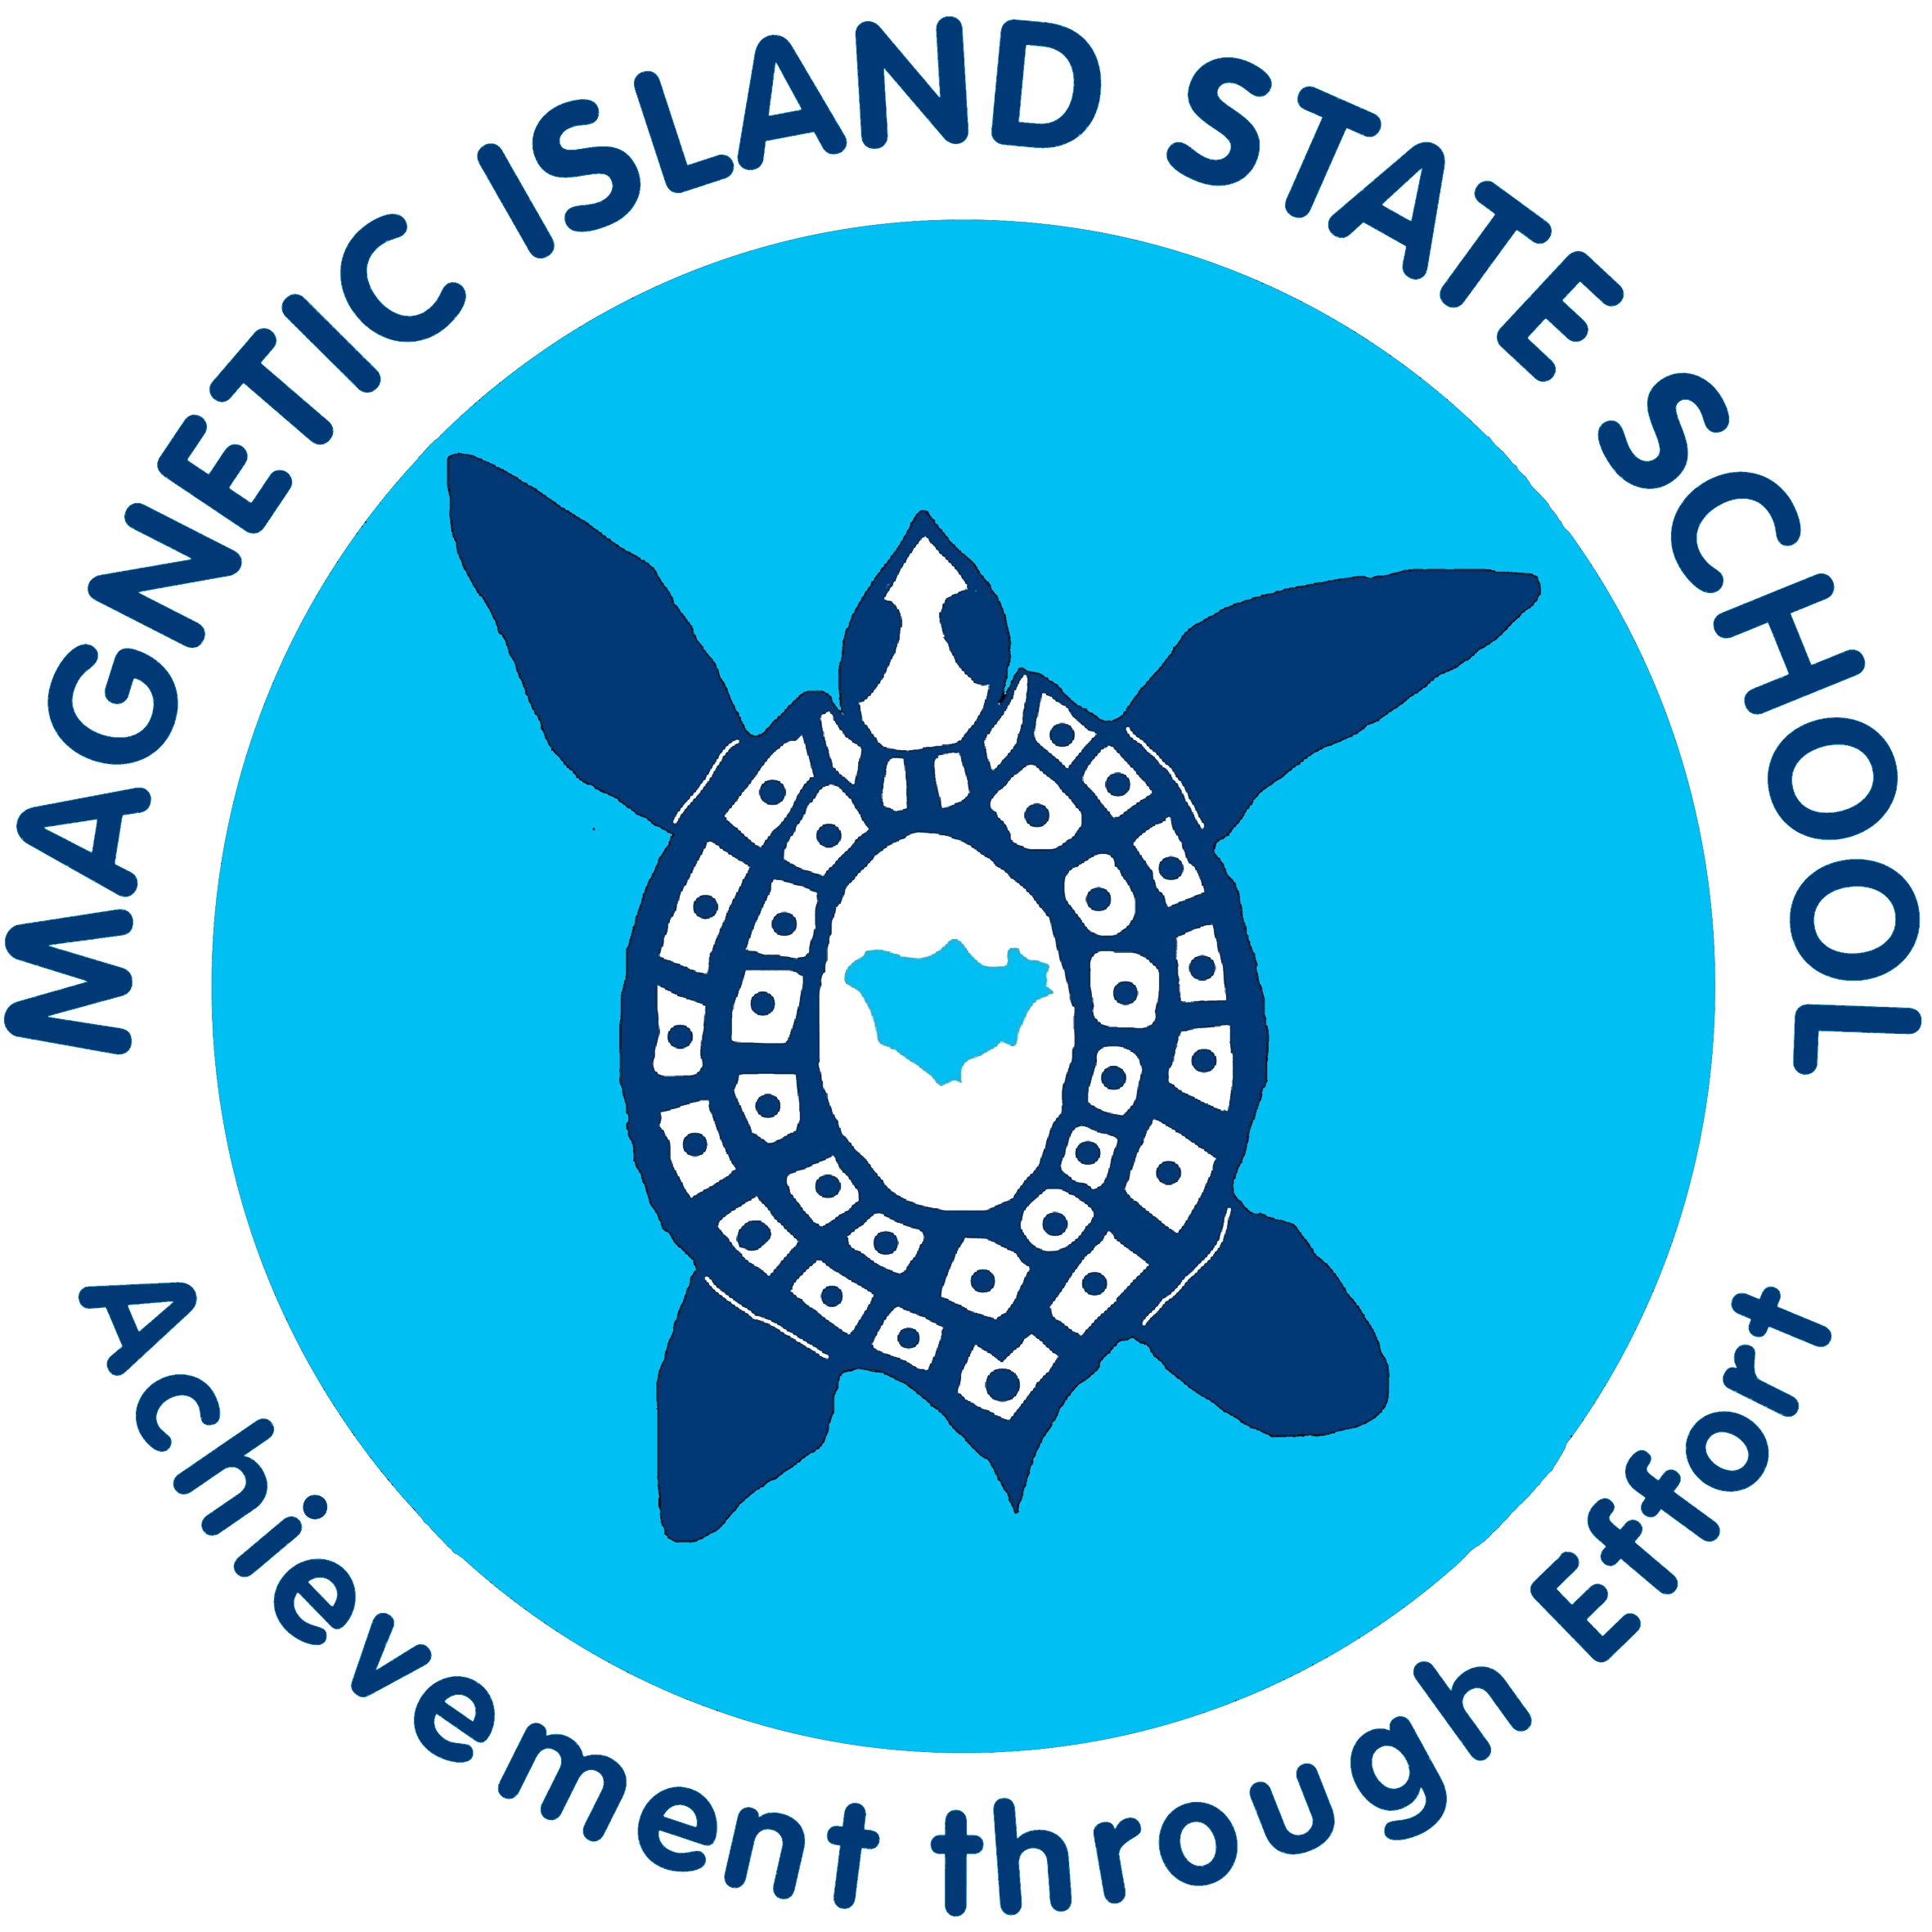 Magnetic Island State School